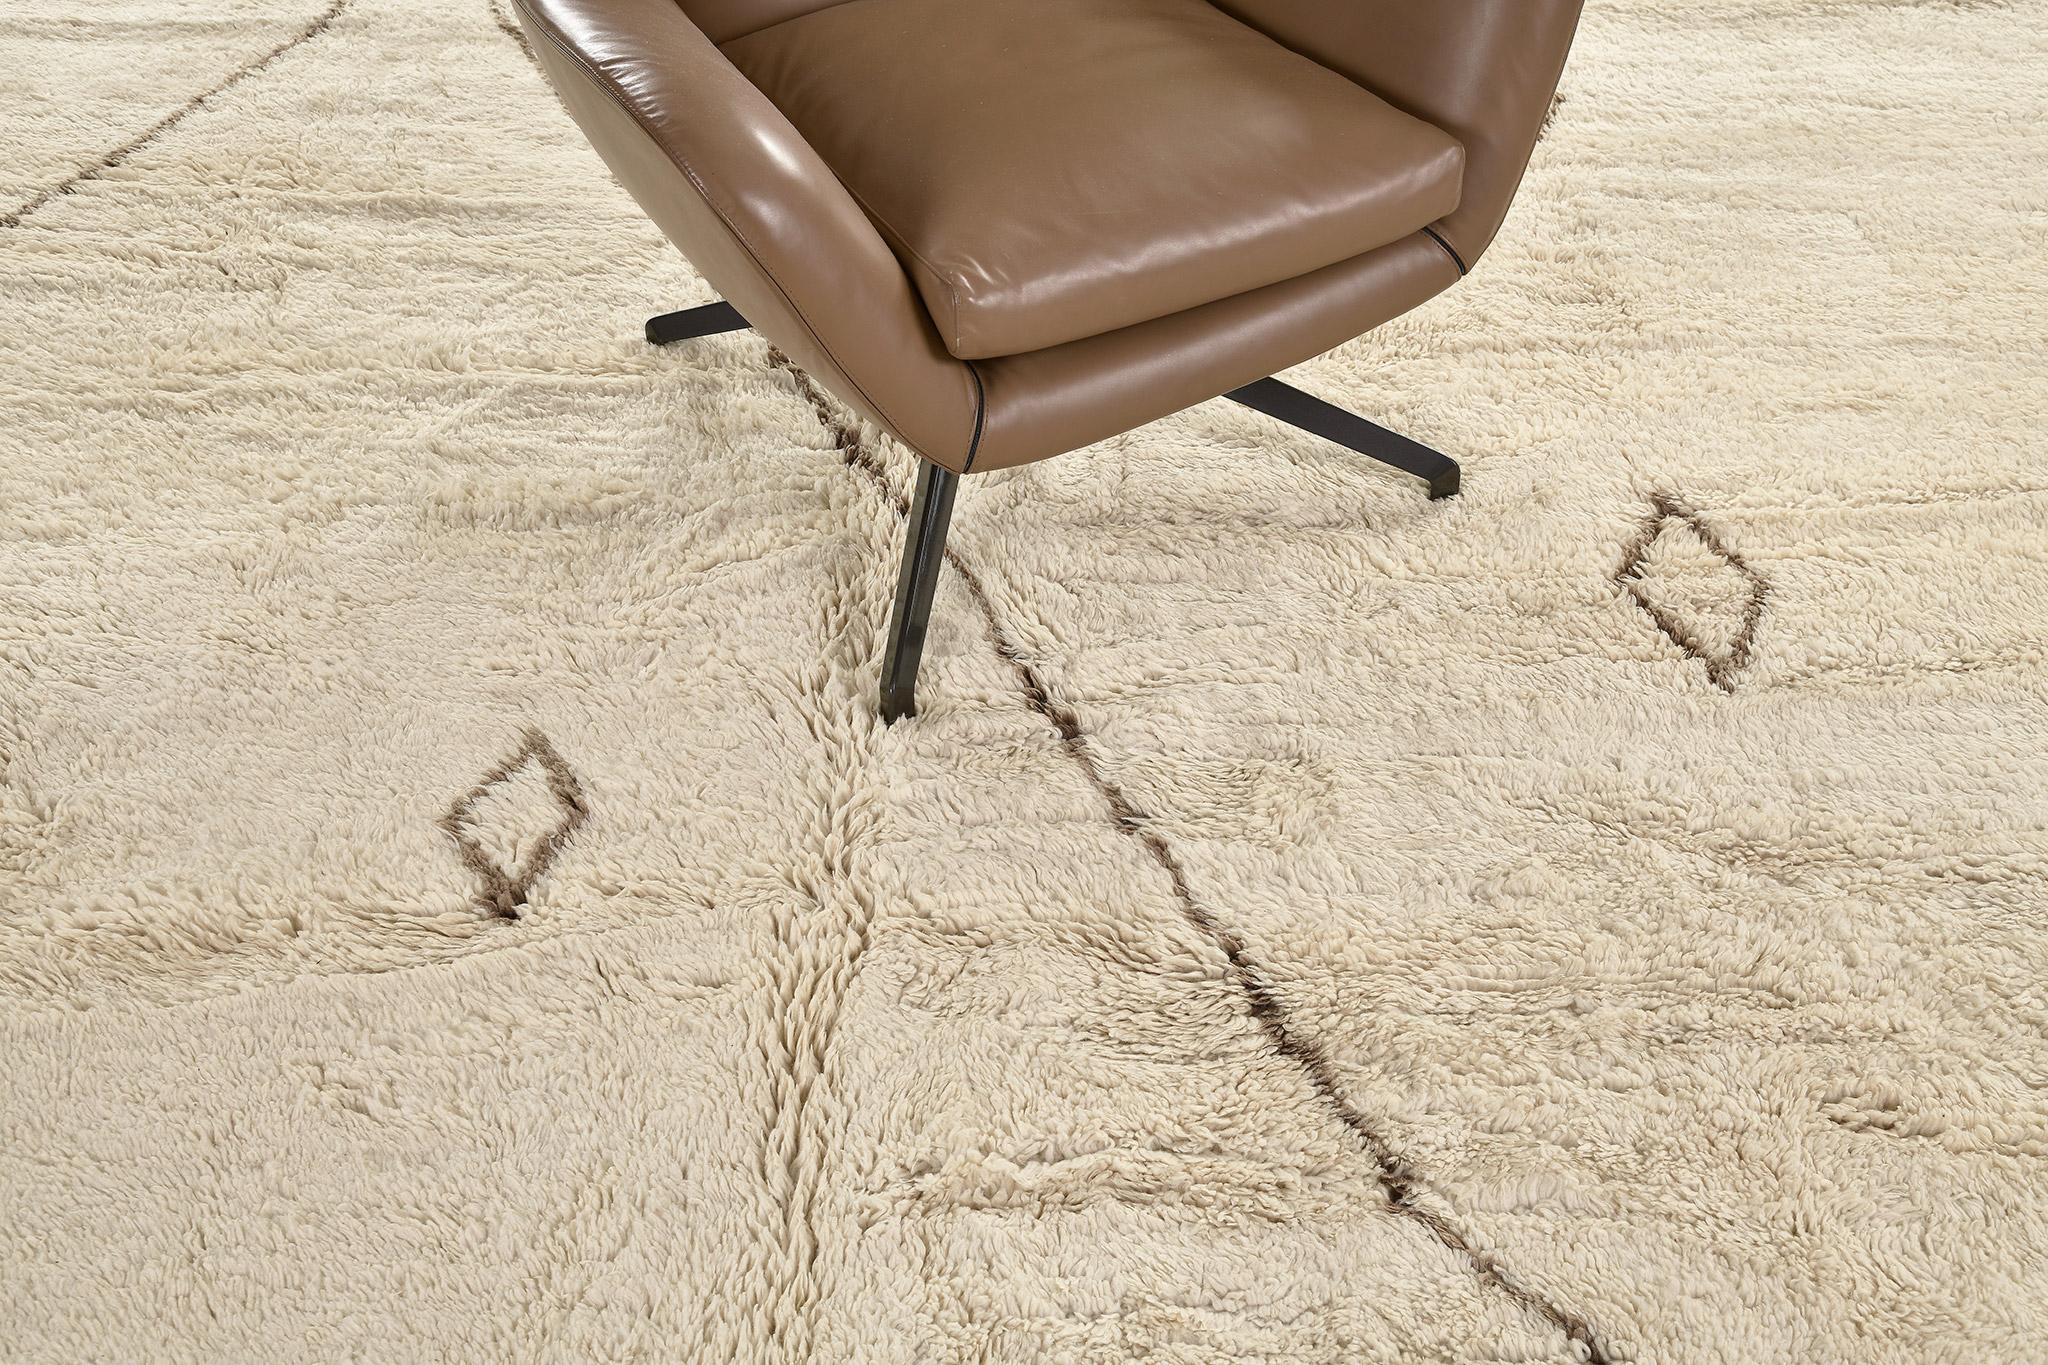 Be captivated by this luxurious carpet from Morroco. lt has a diamond pattern through the natural light brown rug and showcases the design in outlined-contrast which made it more unique. Sink your feet into a Middle Atlas Tribe kind of rug that will